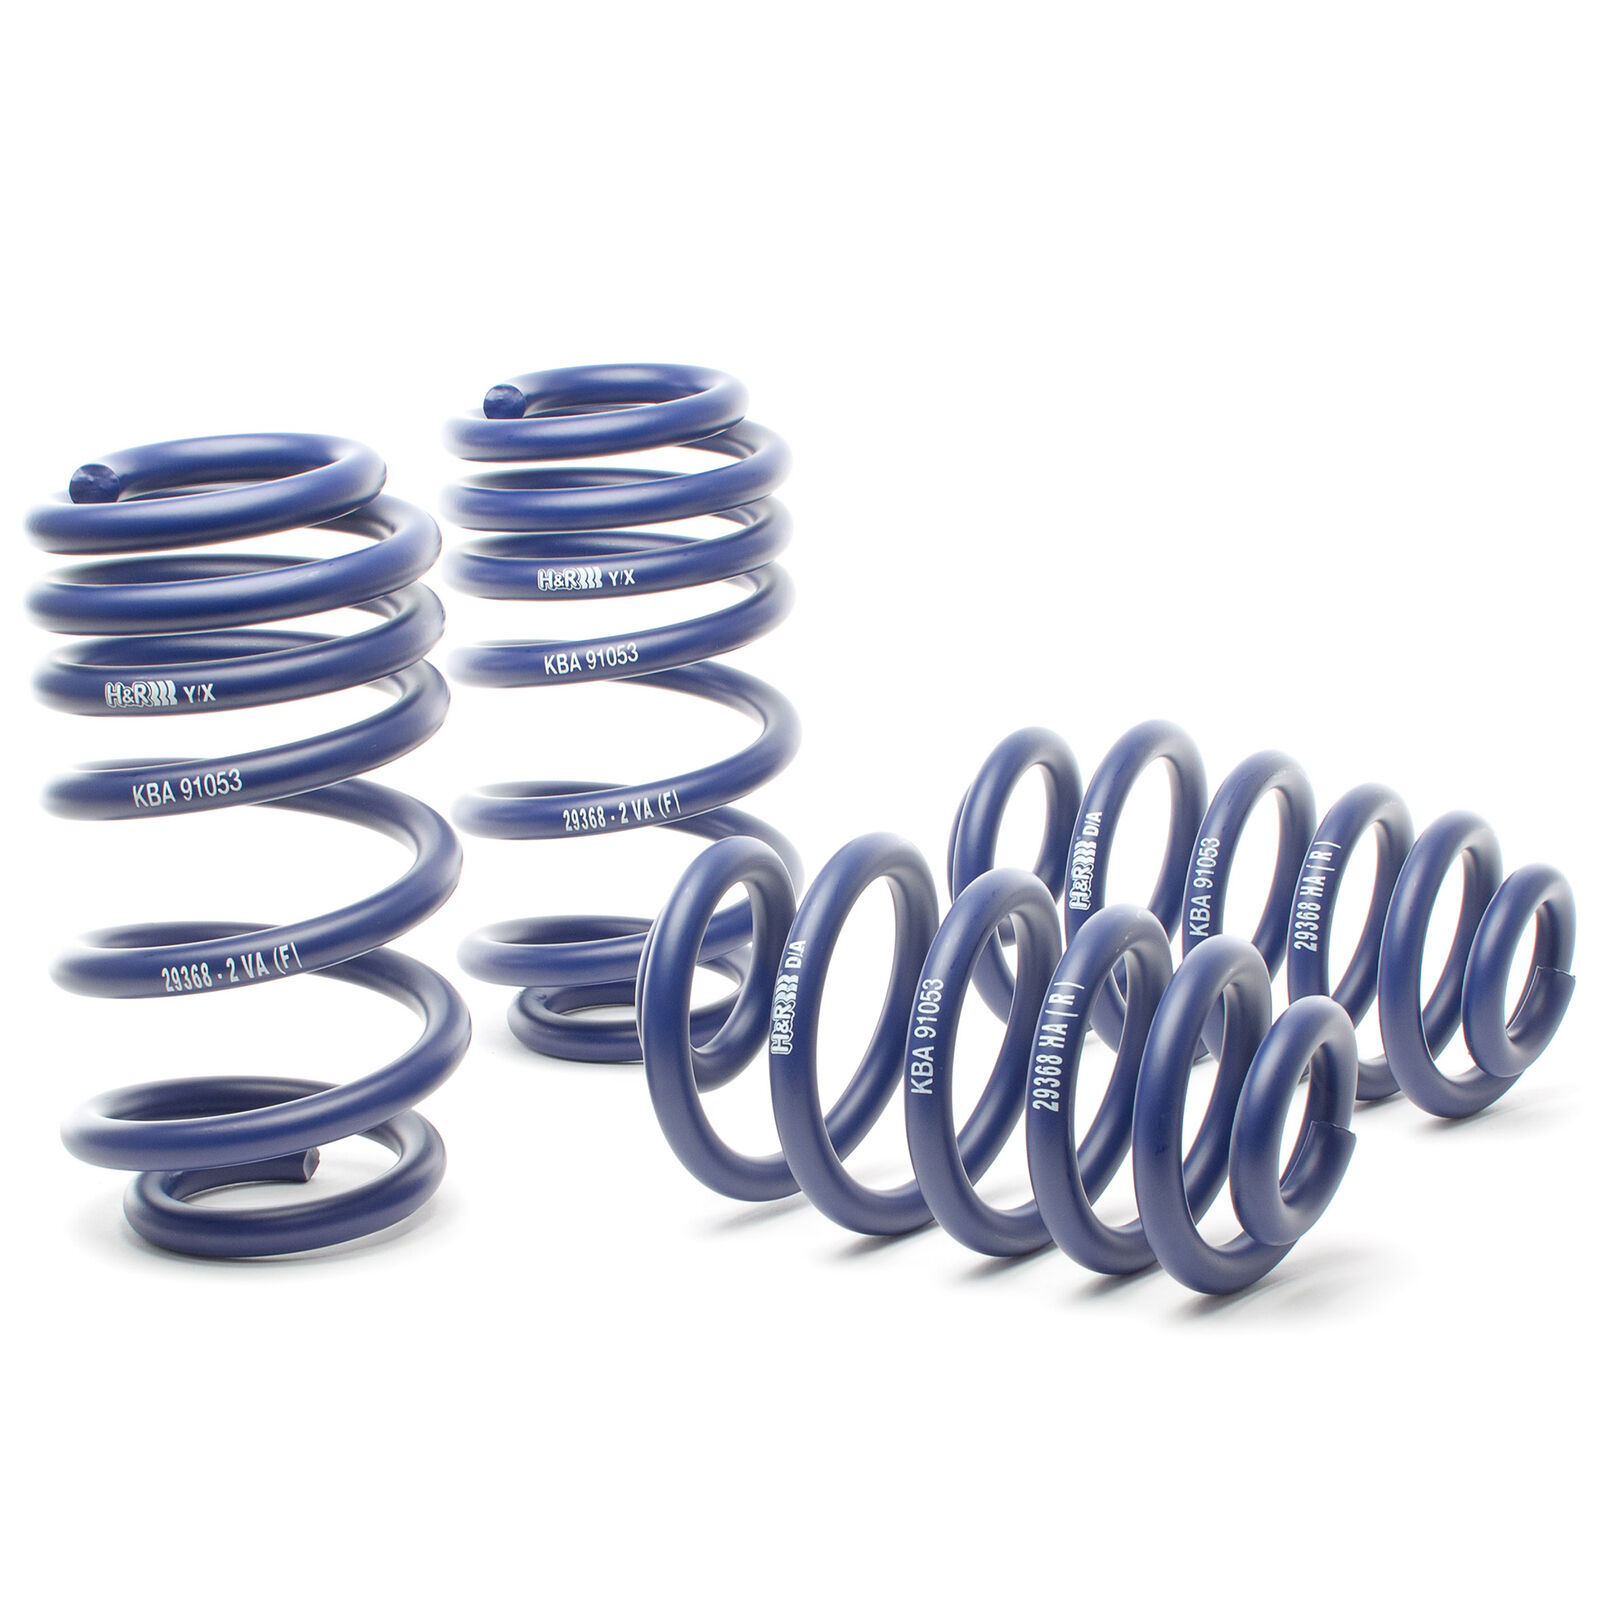 H&R 29368-2 Lowering Front and Rear Springs Kit for 02-08 Audi A4 Quattro 8E V6